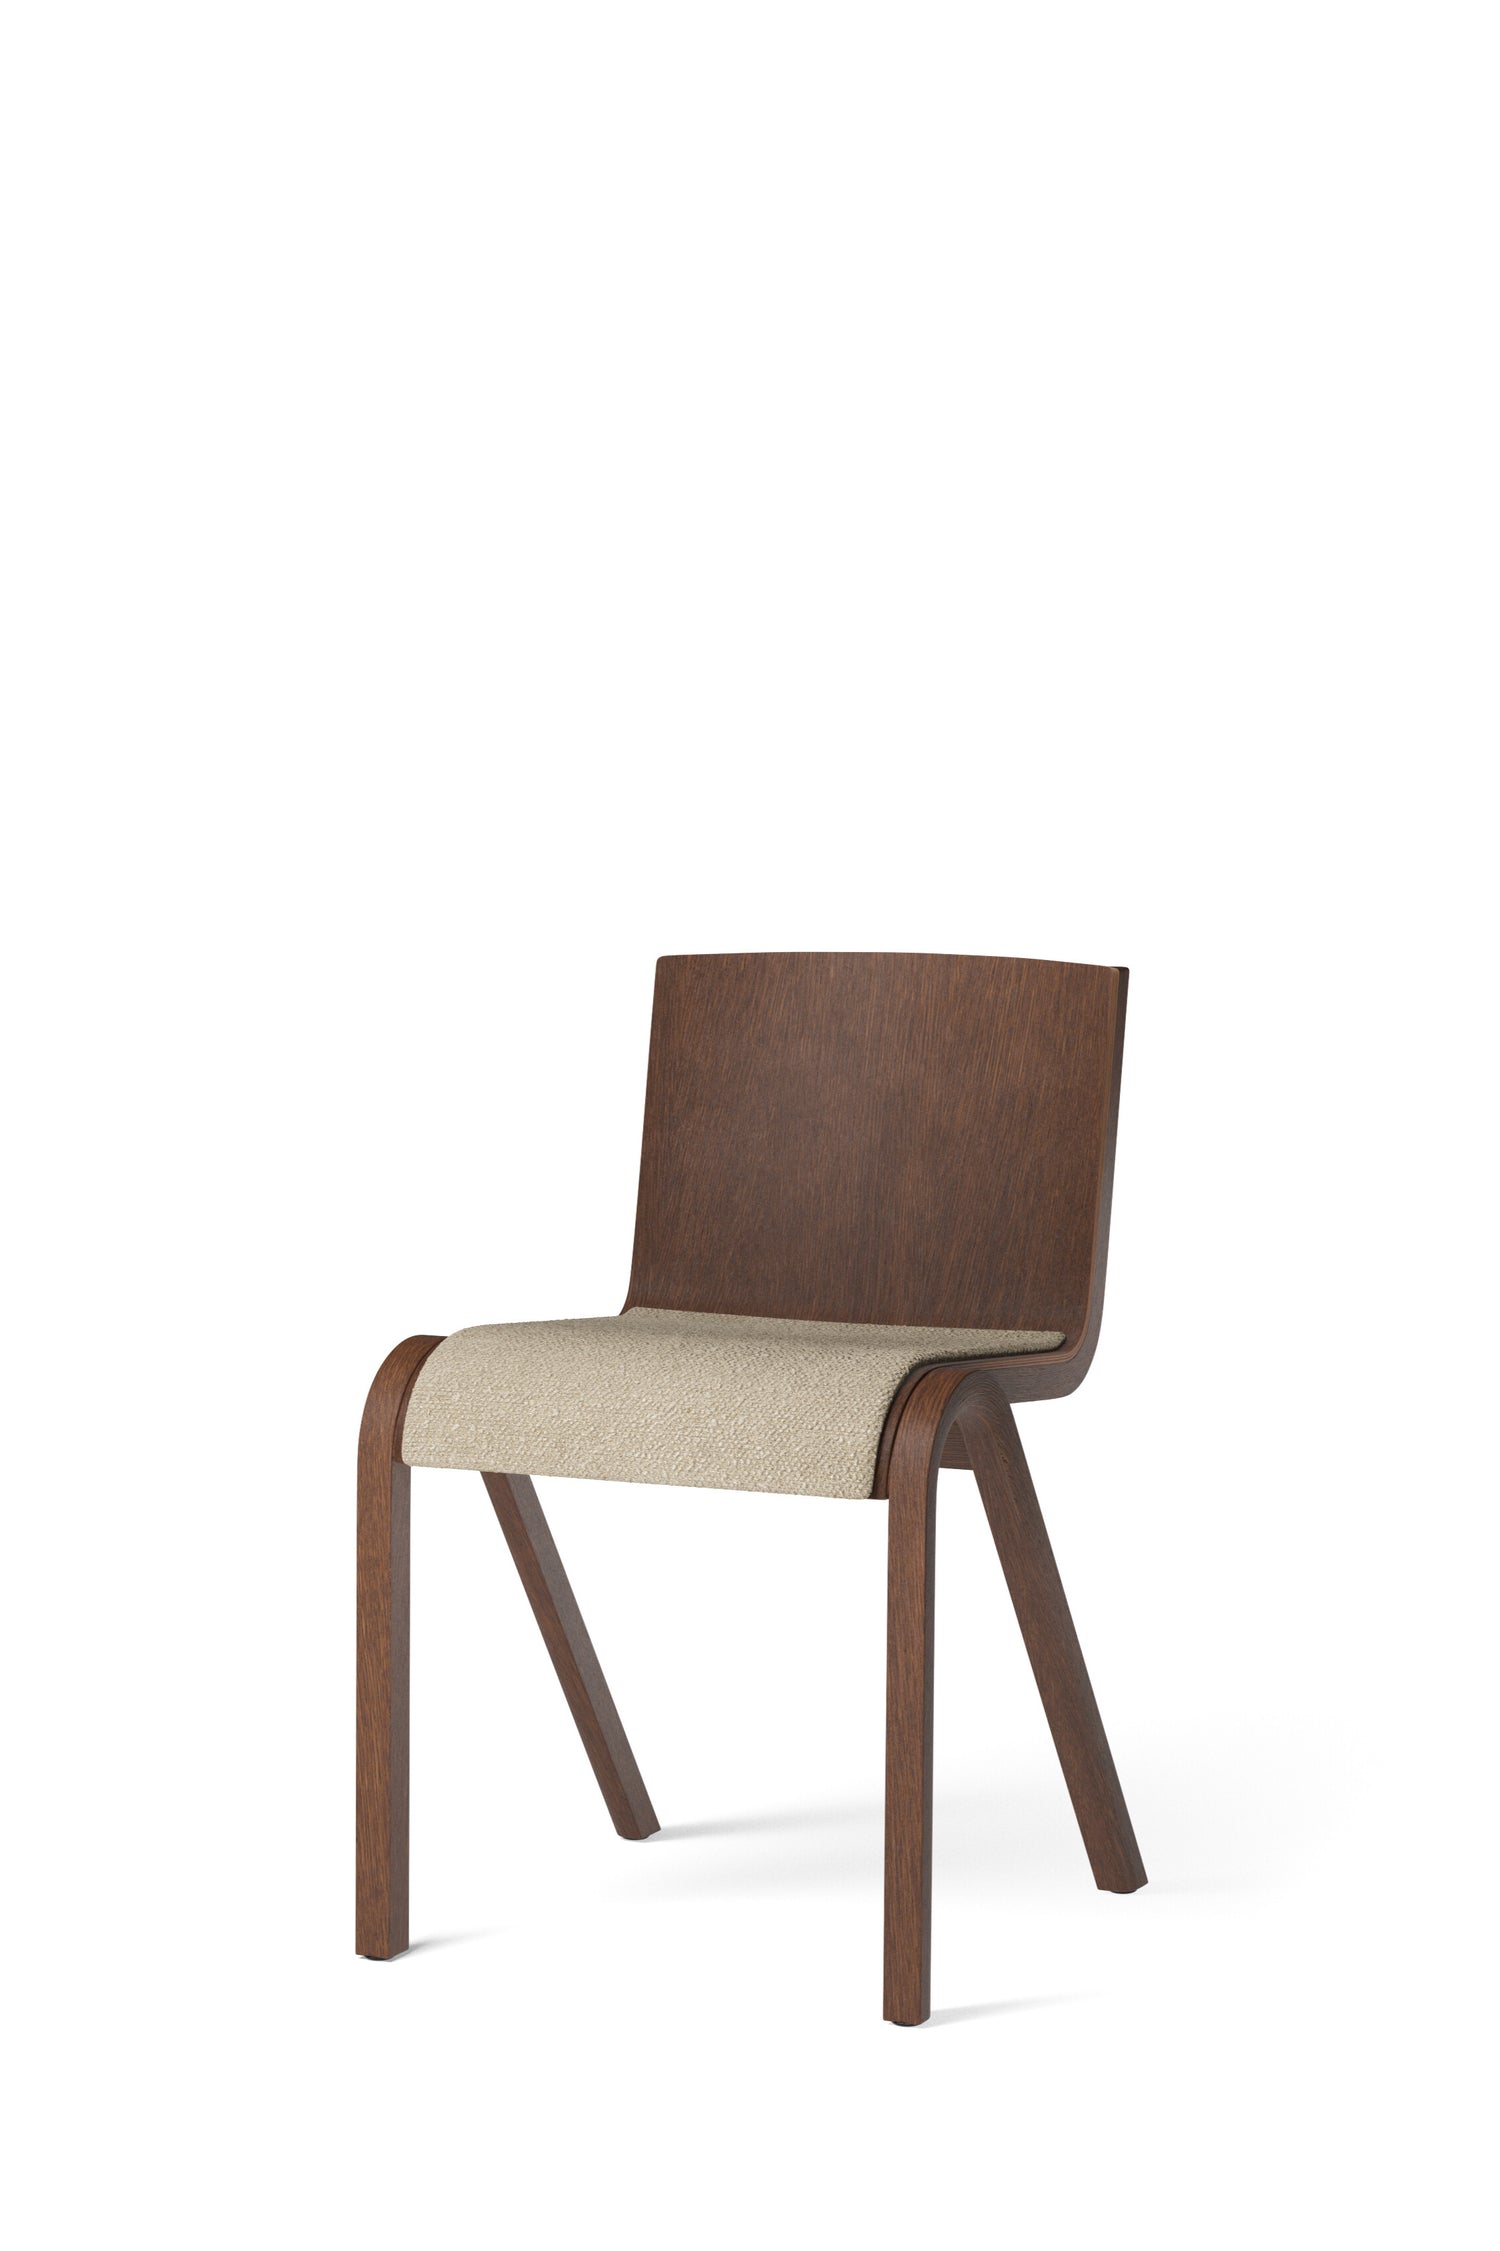 The Ready Dining Chair Seat Upholstered in Red Stained Oak and Audo Bouclé 02 from Audo Copenhagen.